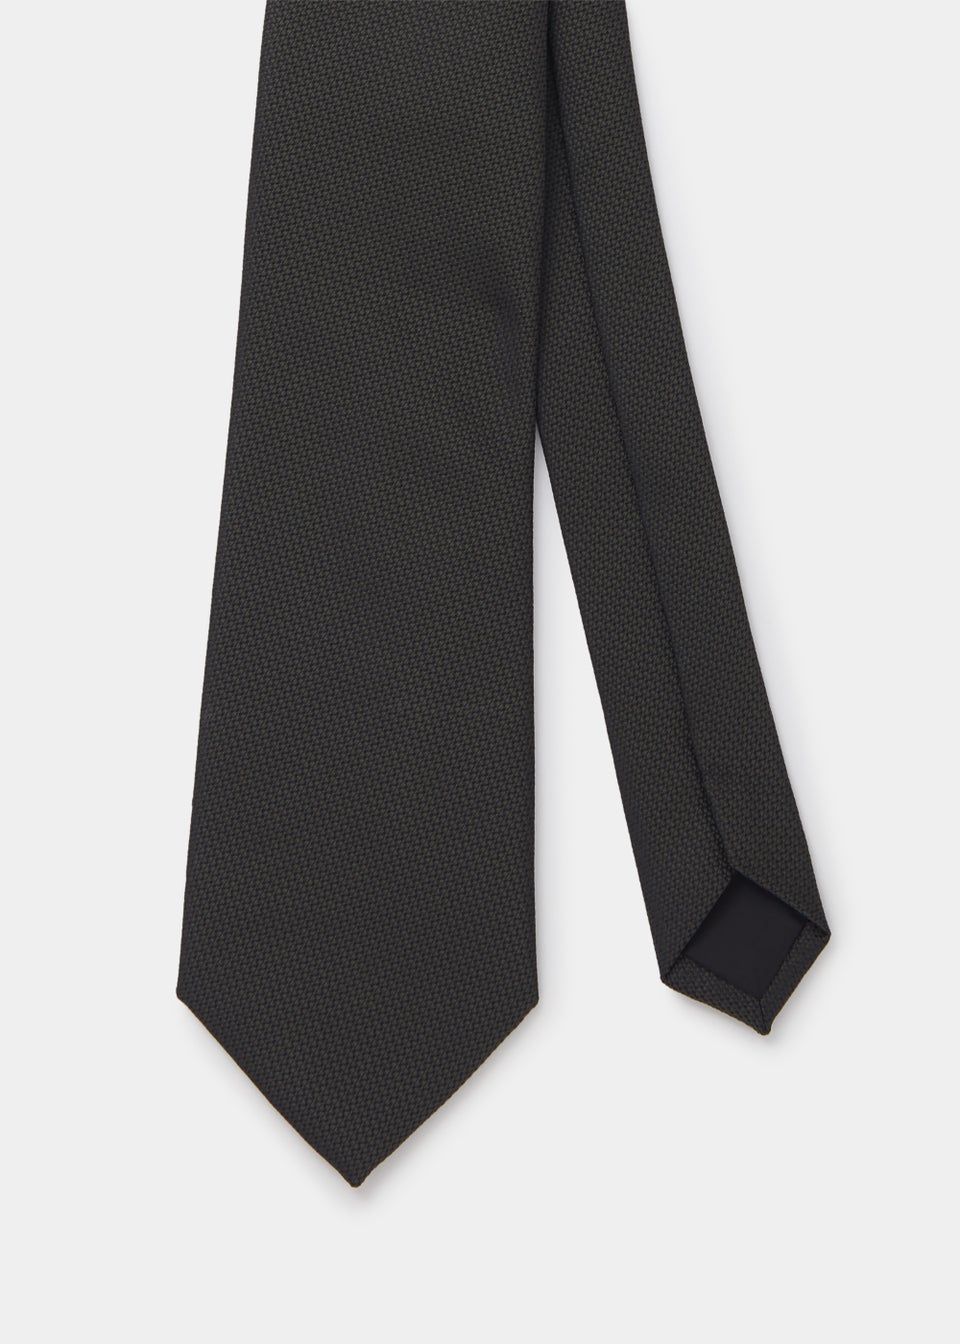 Taylor & Wright Plain Textured Green Tie